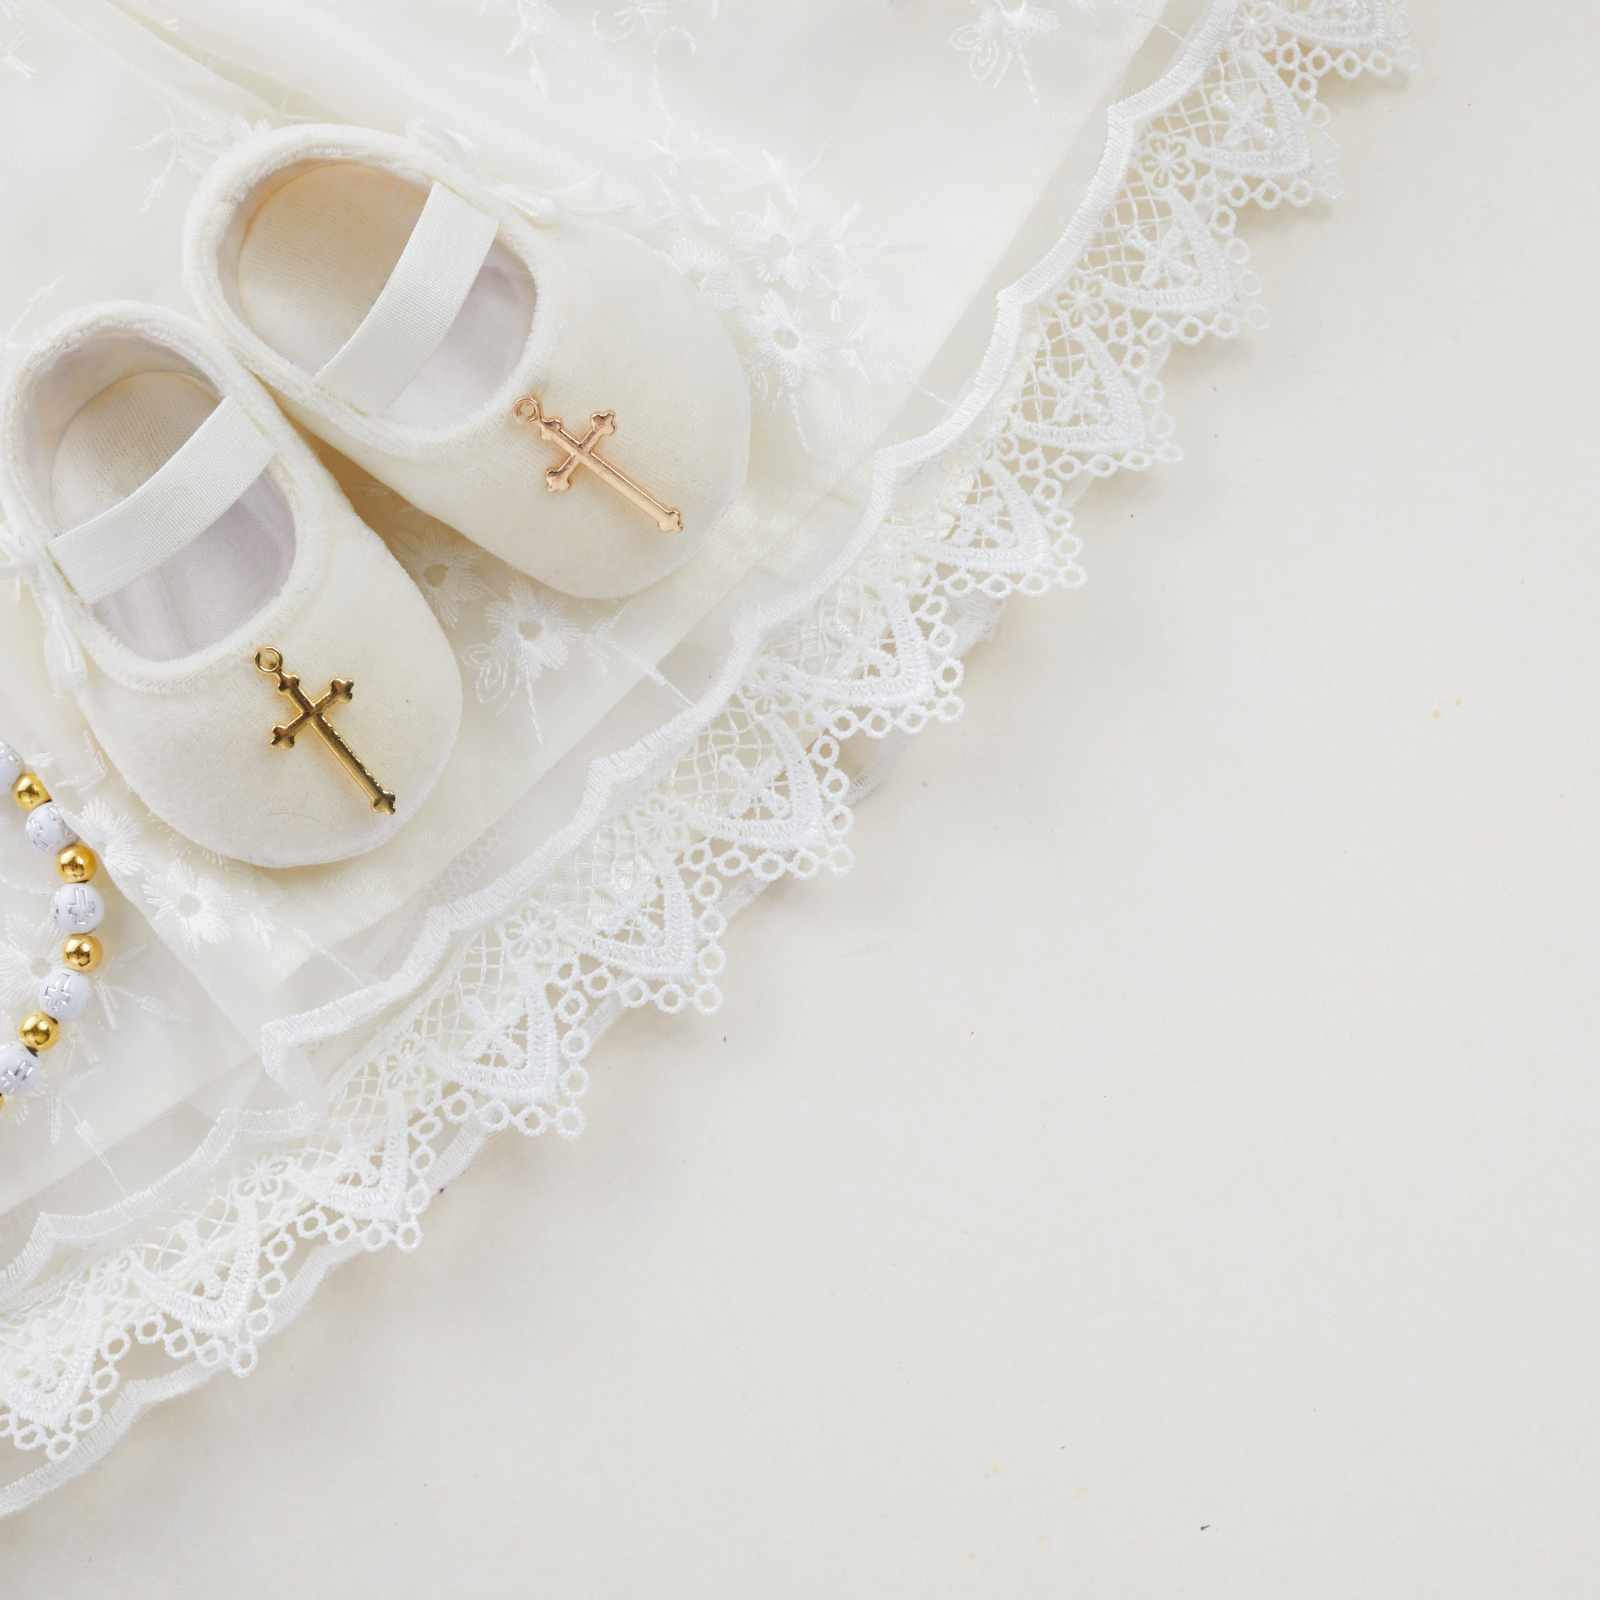 Christening Quotes For Baby's Baptism